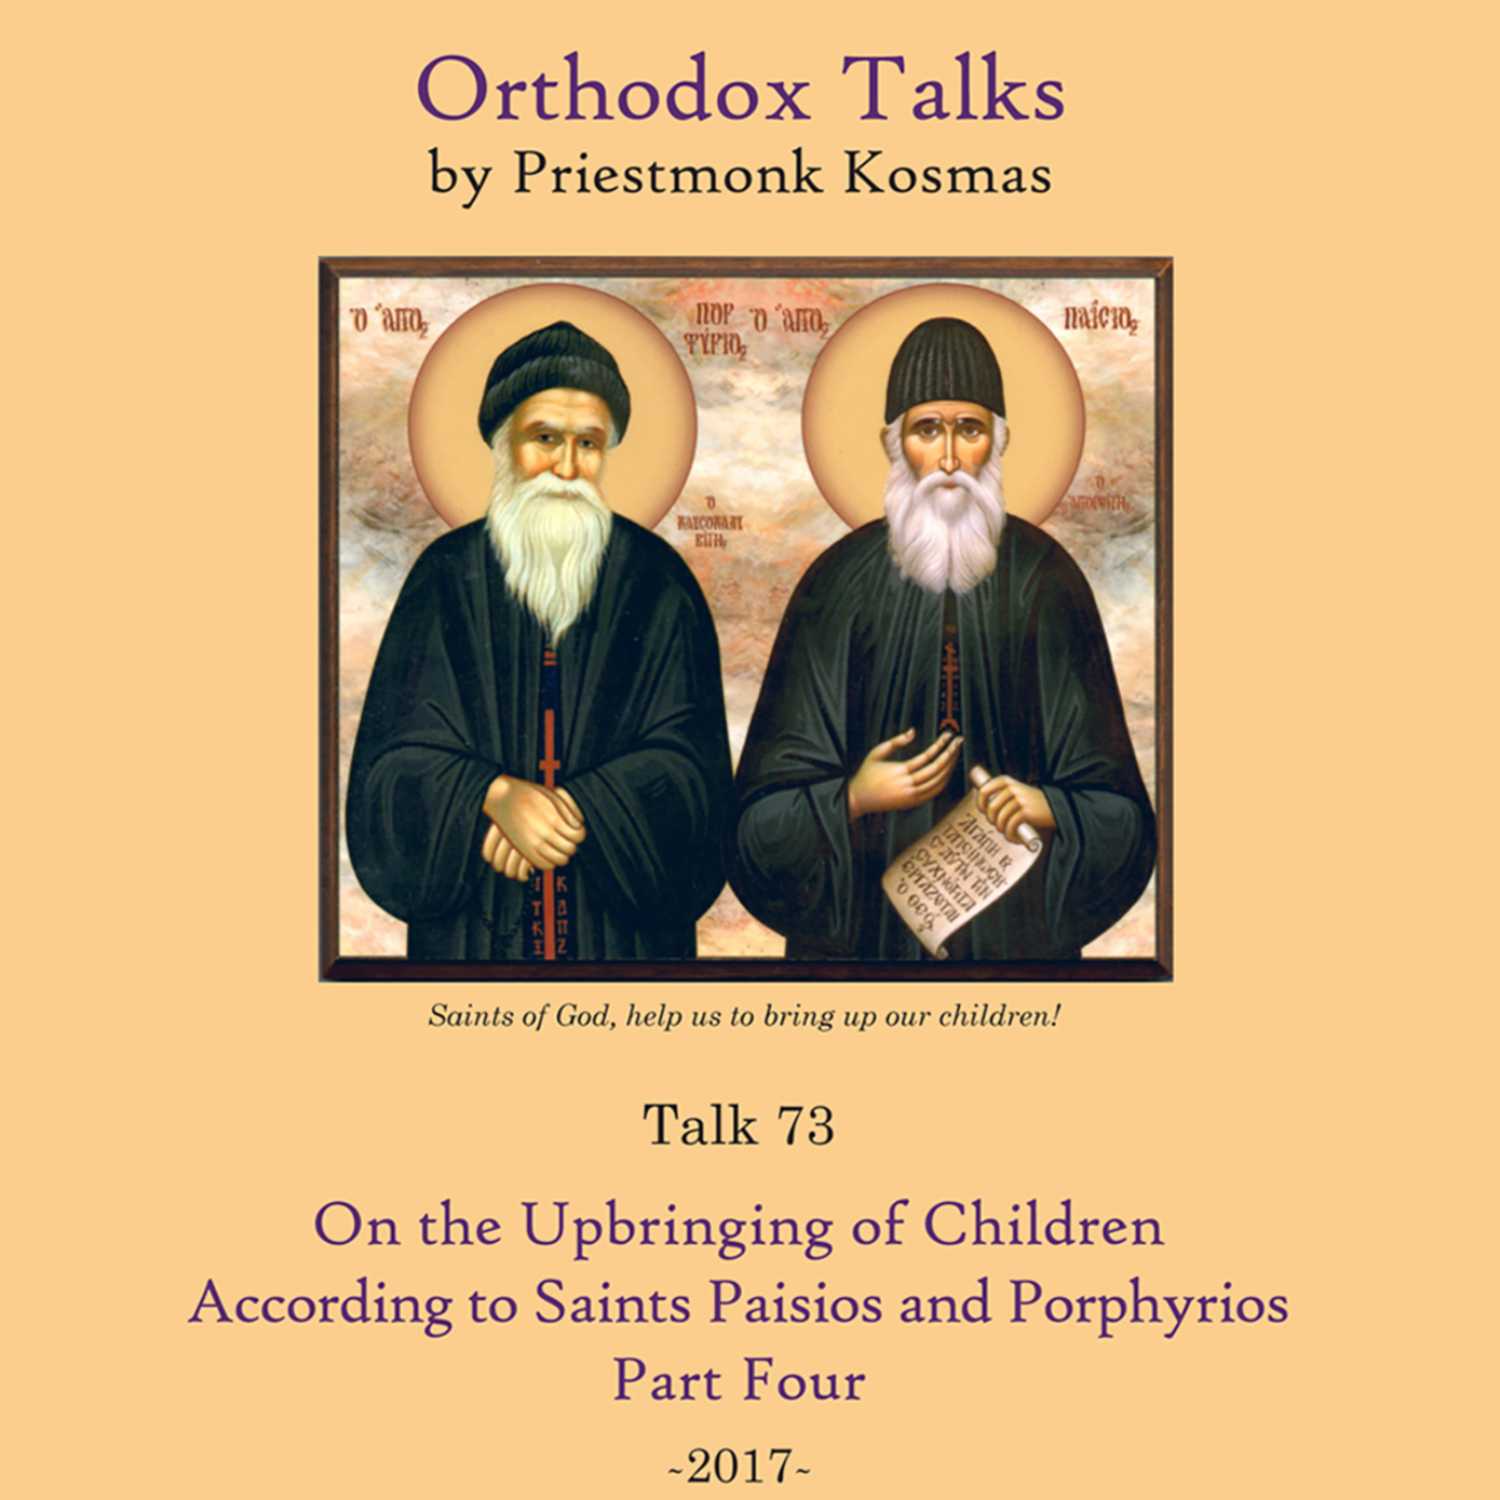 Talk 73: On the Upbringing of Children According to Saints Paisios and Porphyrios - Part 4